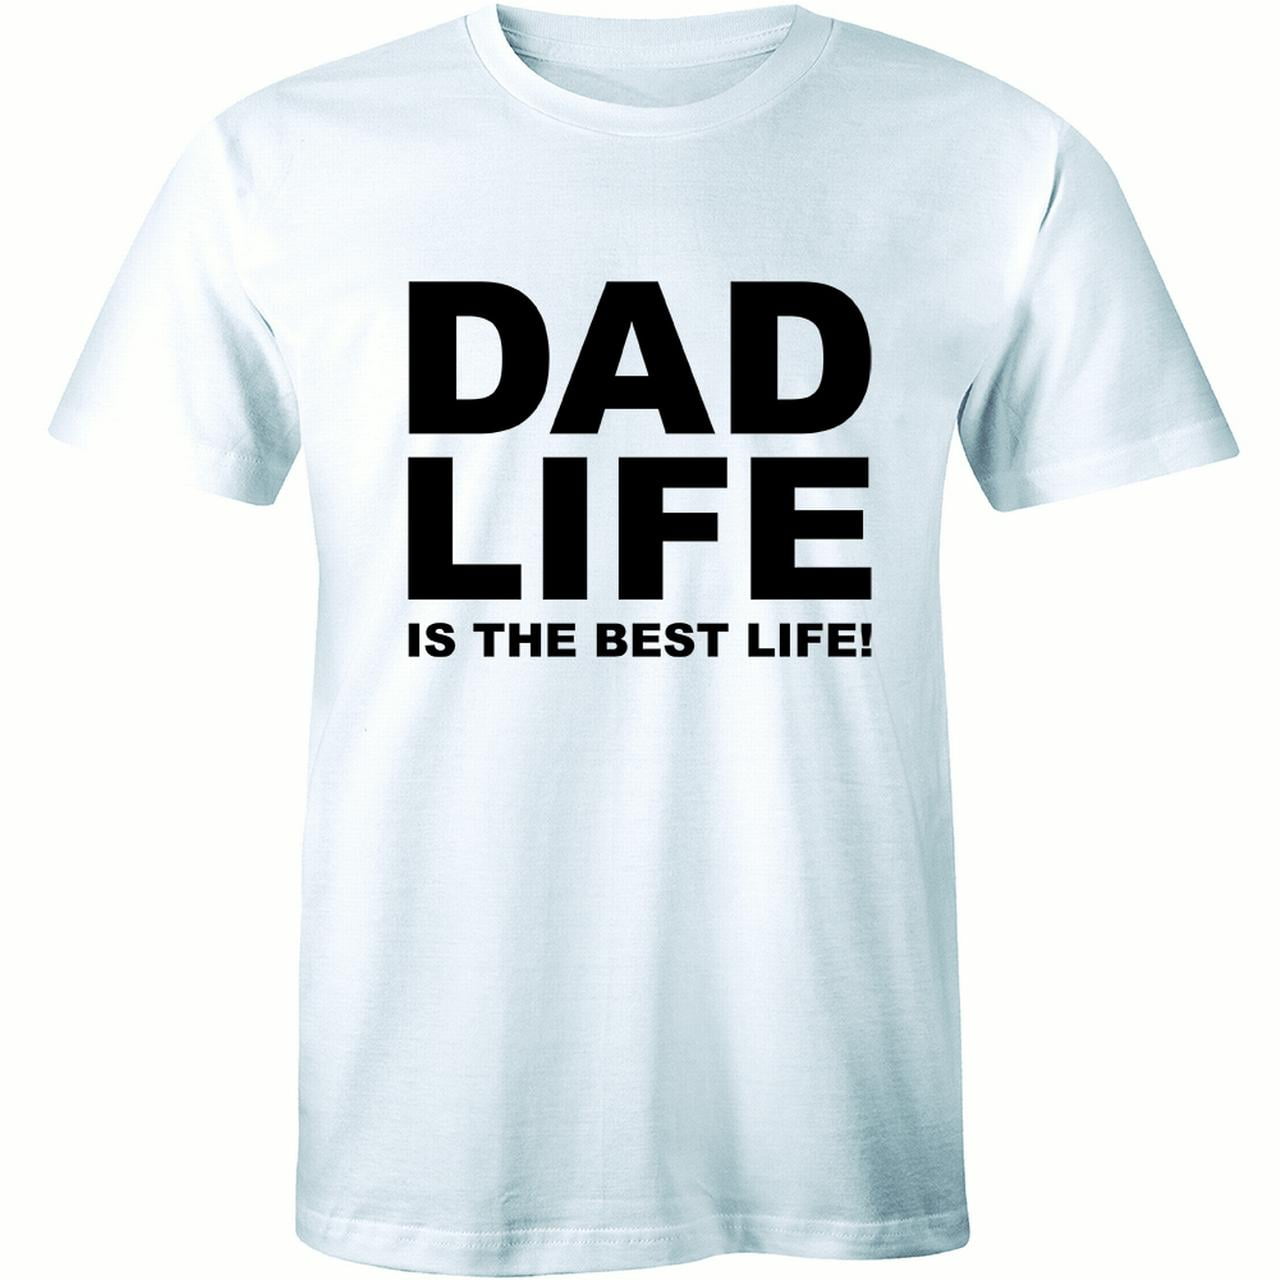 Gamer Dad Fathers Day T Shirt Men Gaming Funny Gift t-shirt White 100/% cotton